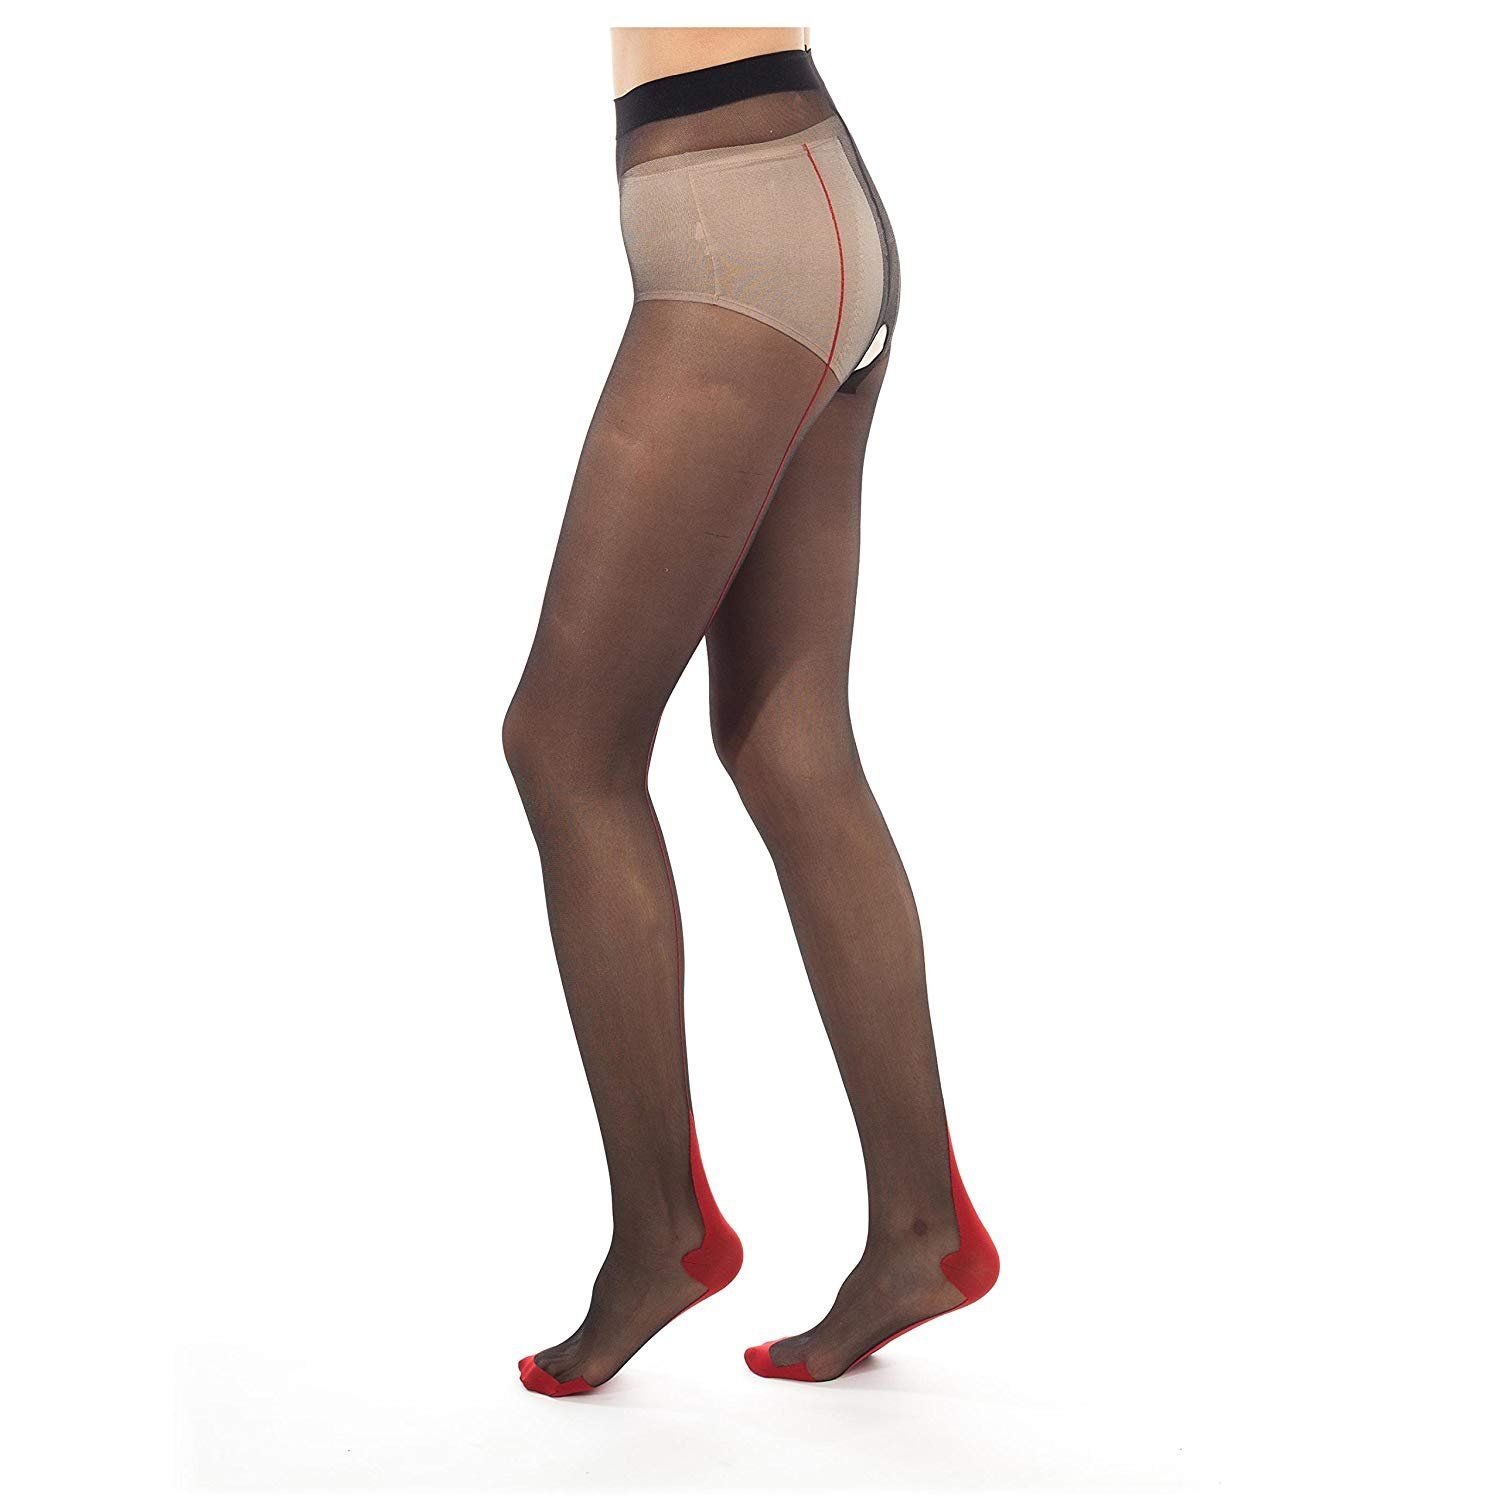 best of Seam crotchless pantyhose Back